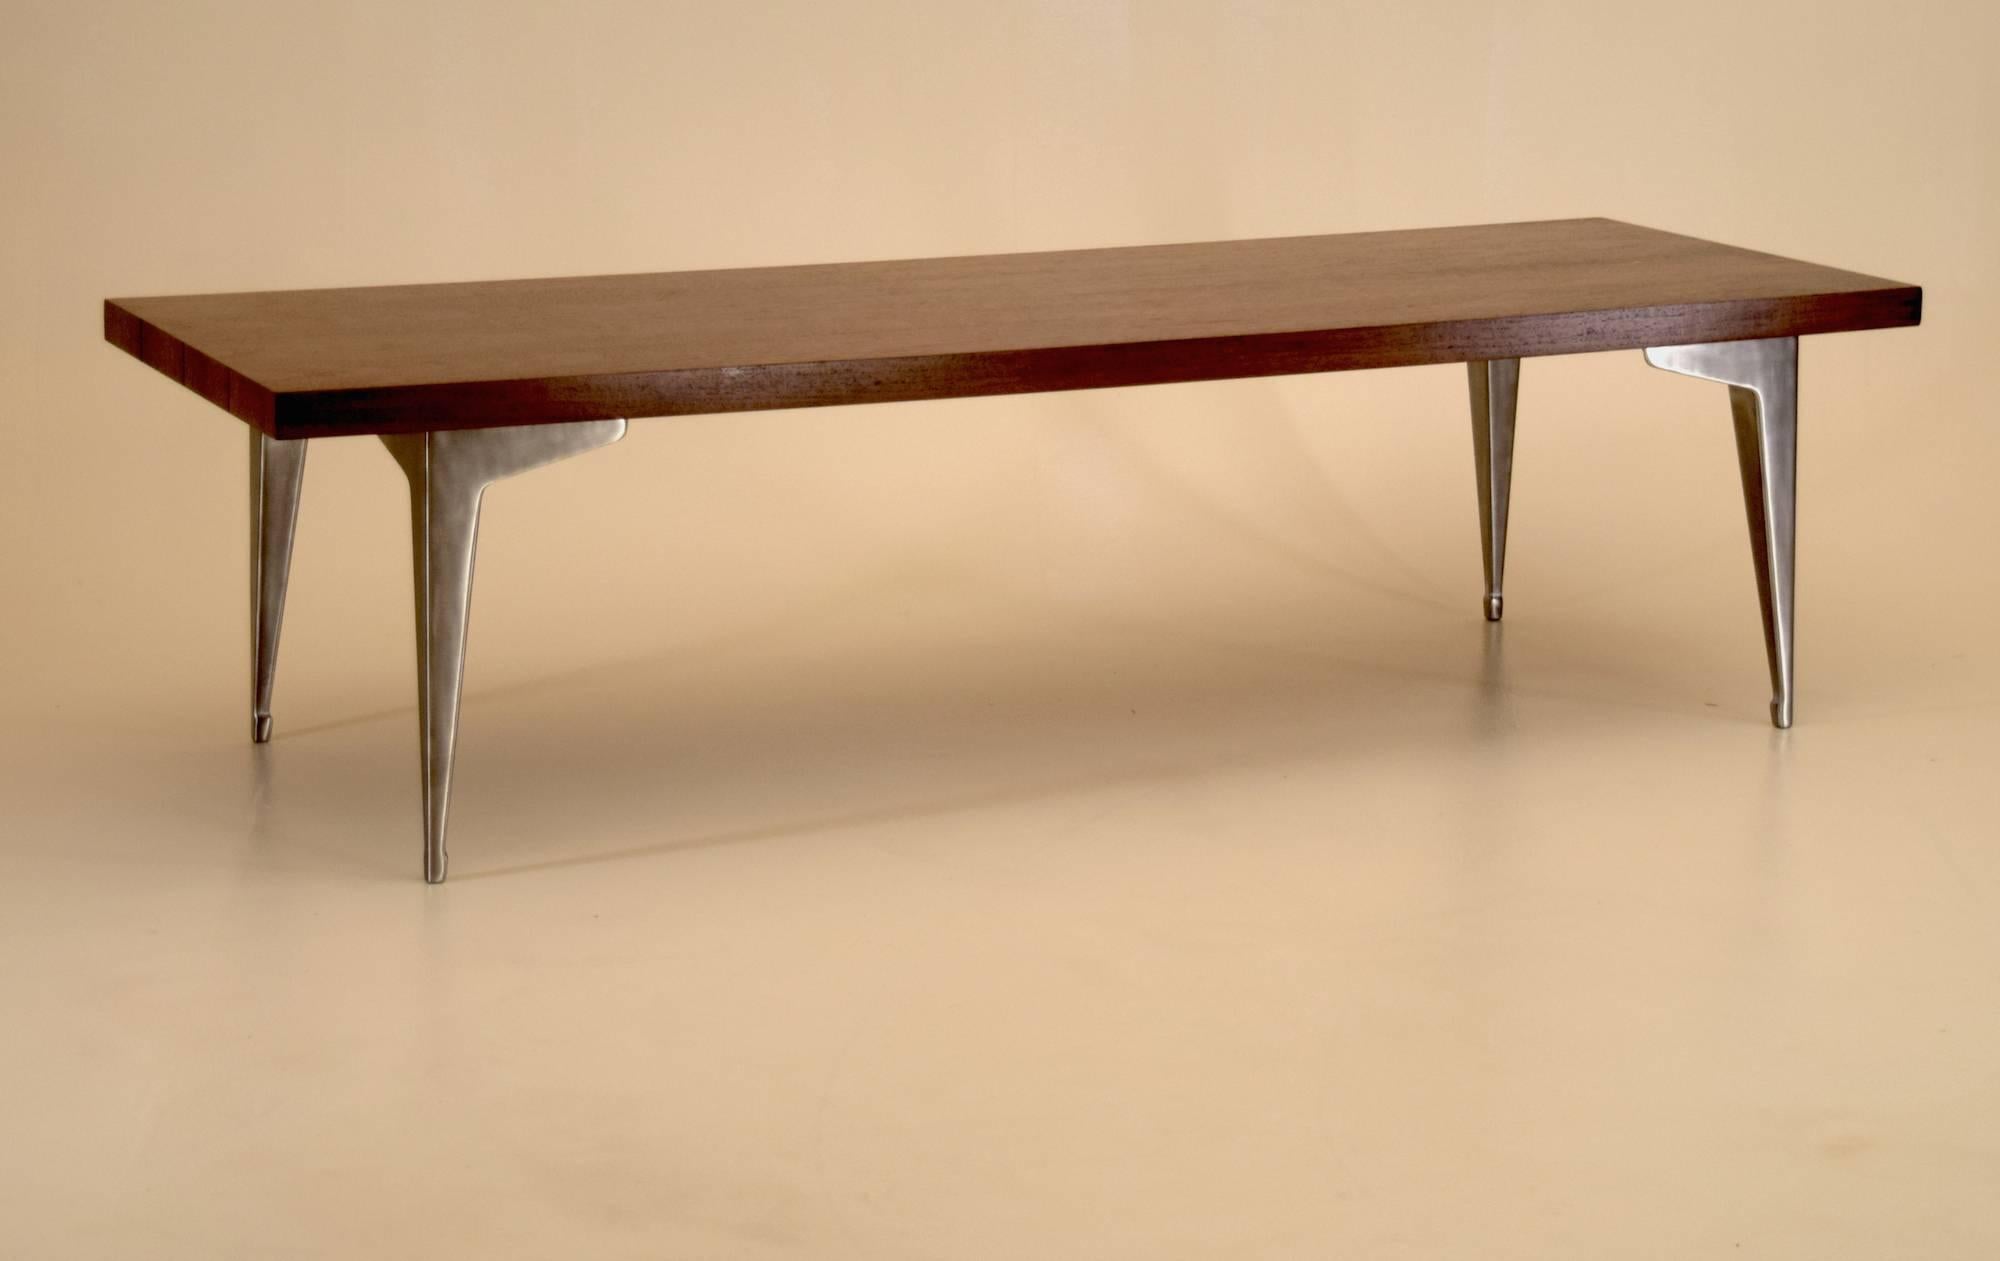 Produced circa 1965, and seldom seen is this table from manufacturer Altavista Lane, from the 